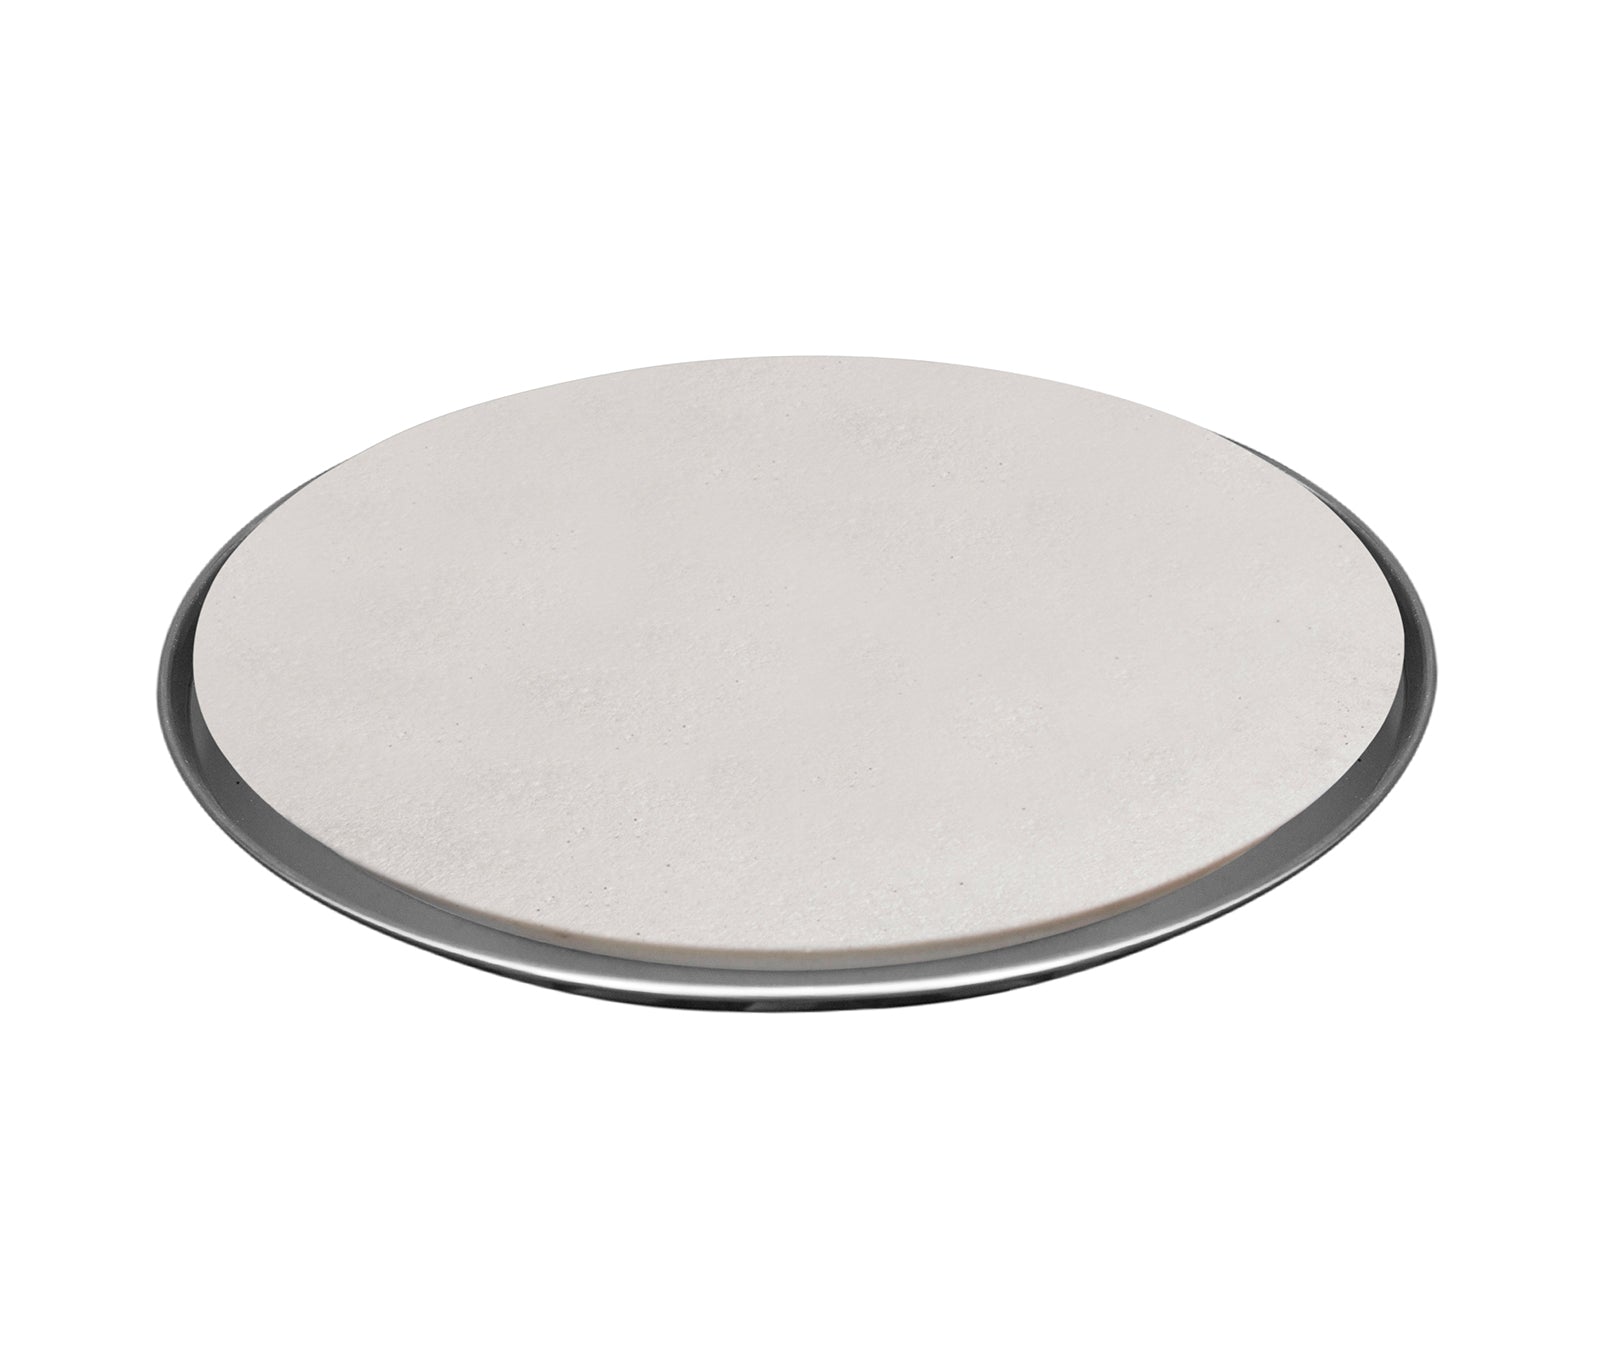 Home Barbecue Grill Baking Stone 14 1/4" Diameter